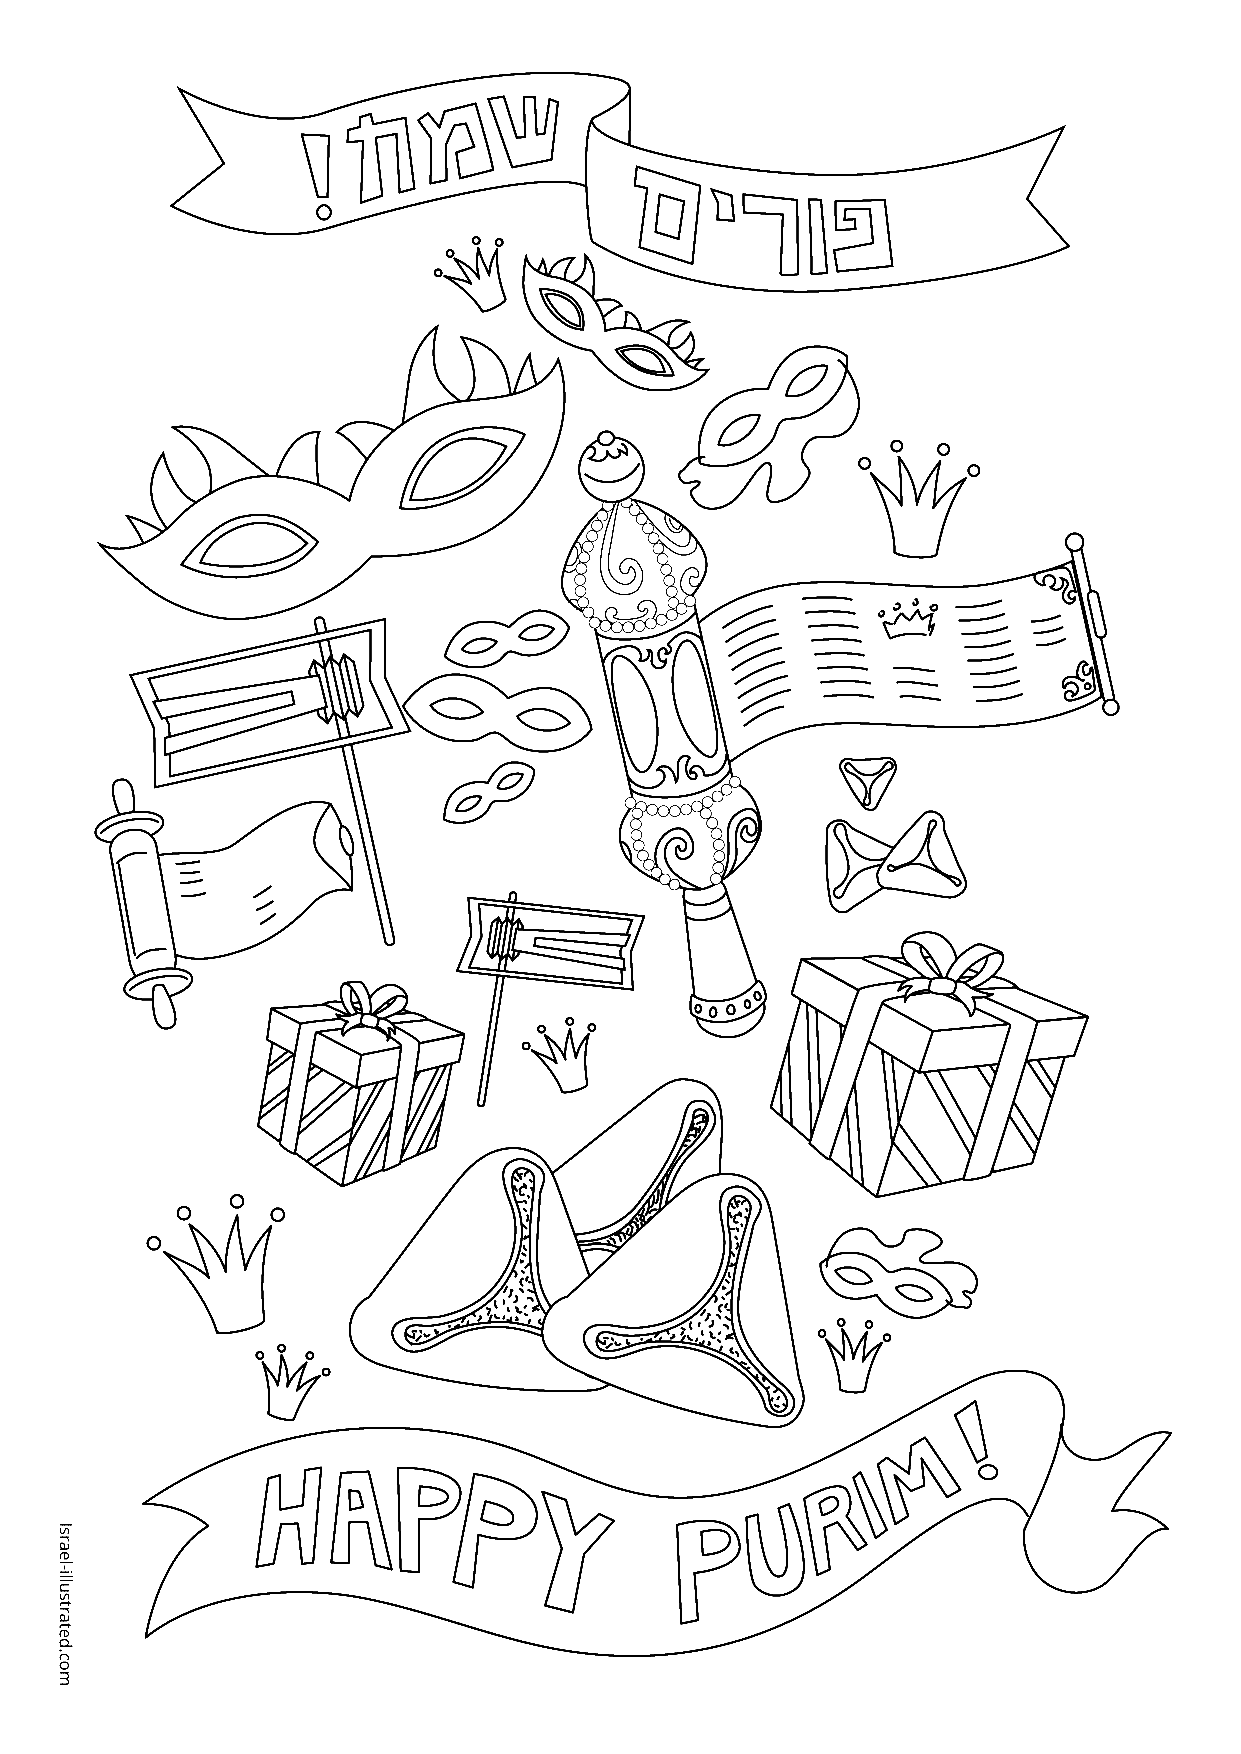 Happy Purim Coloring Page